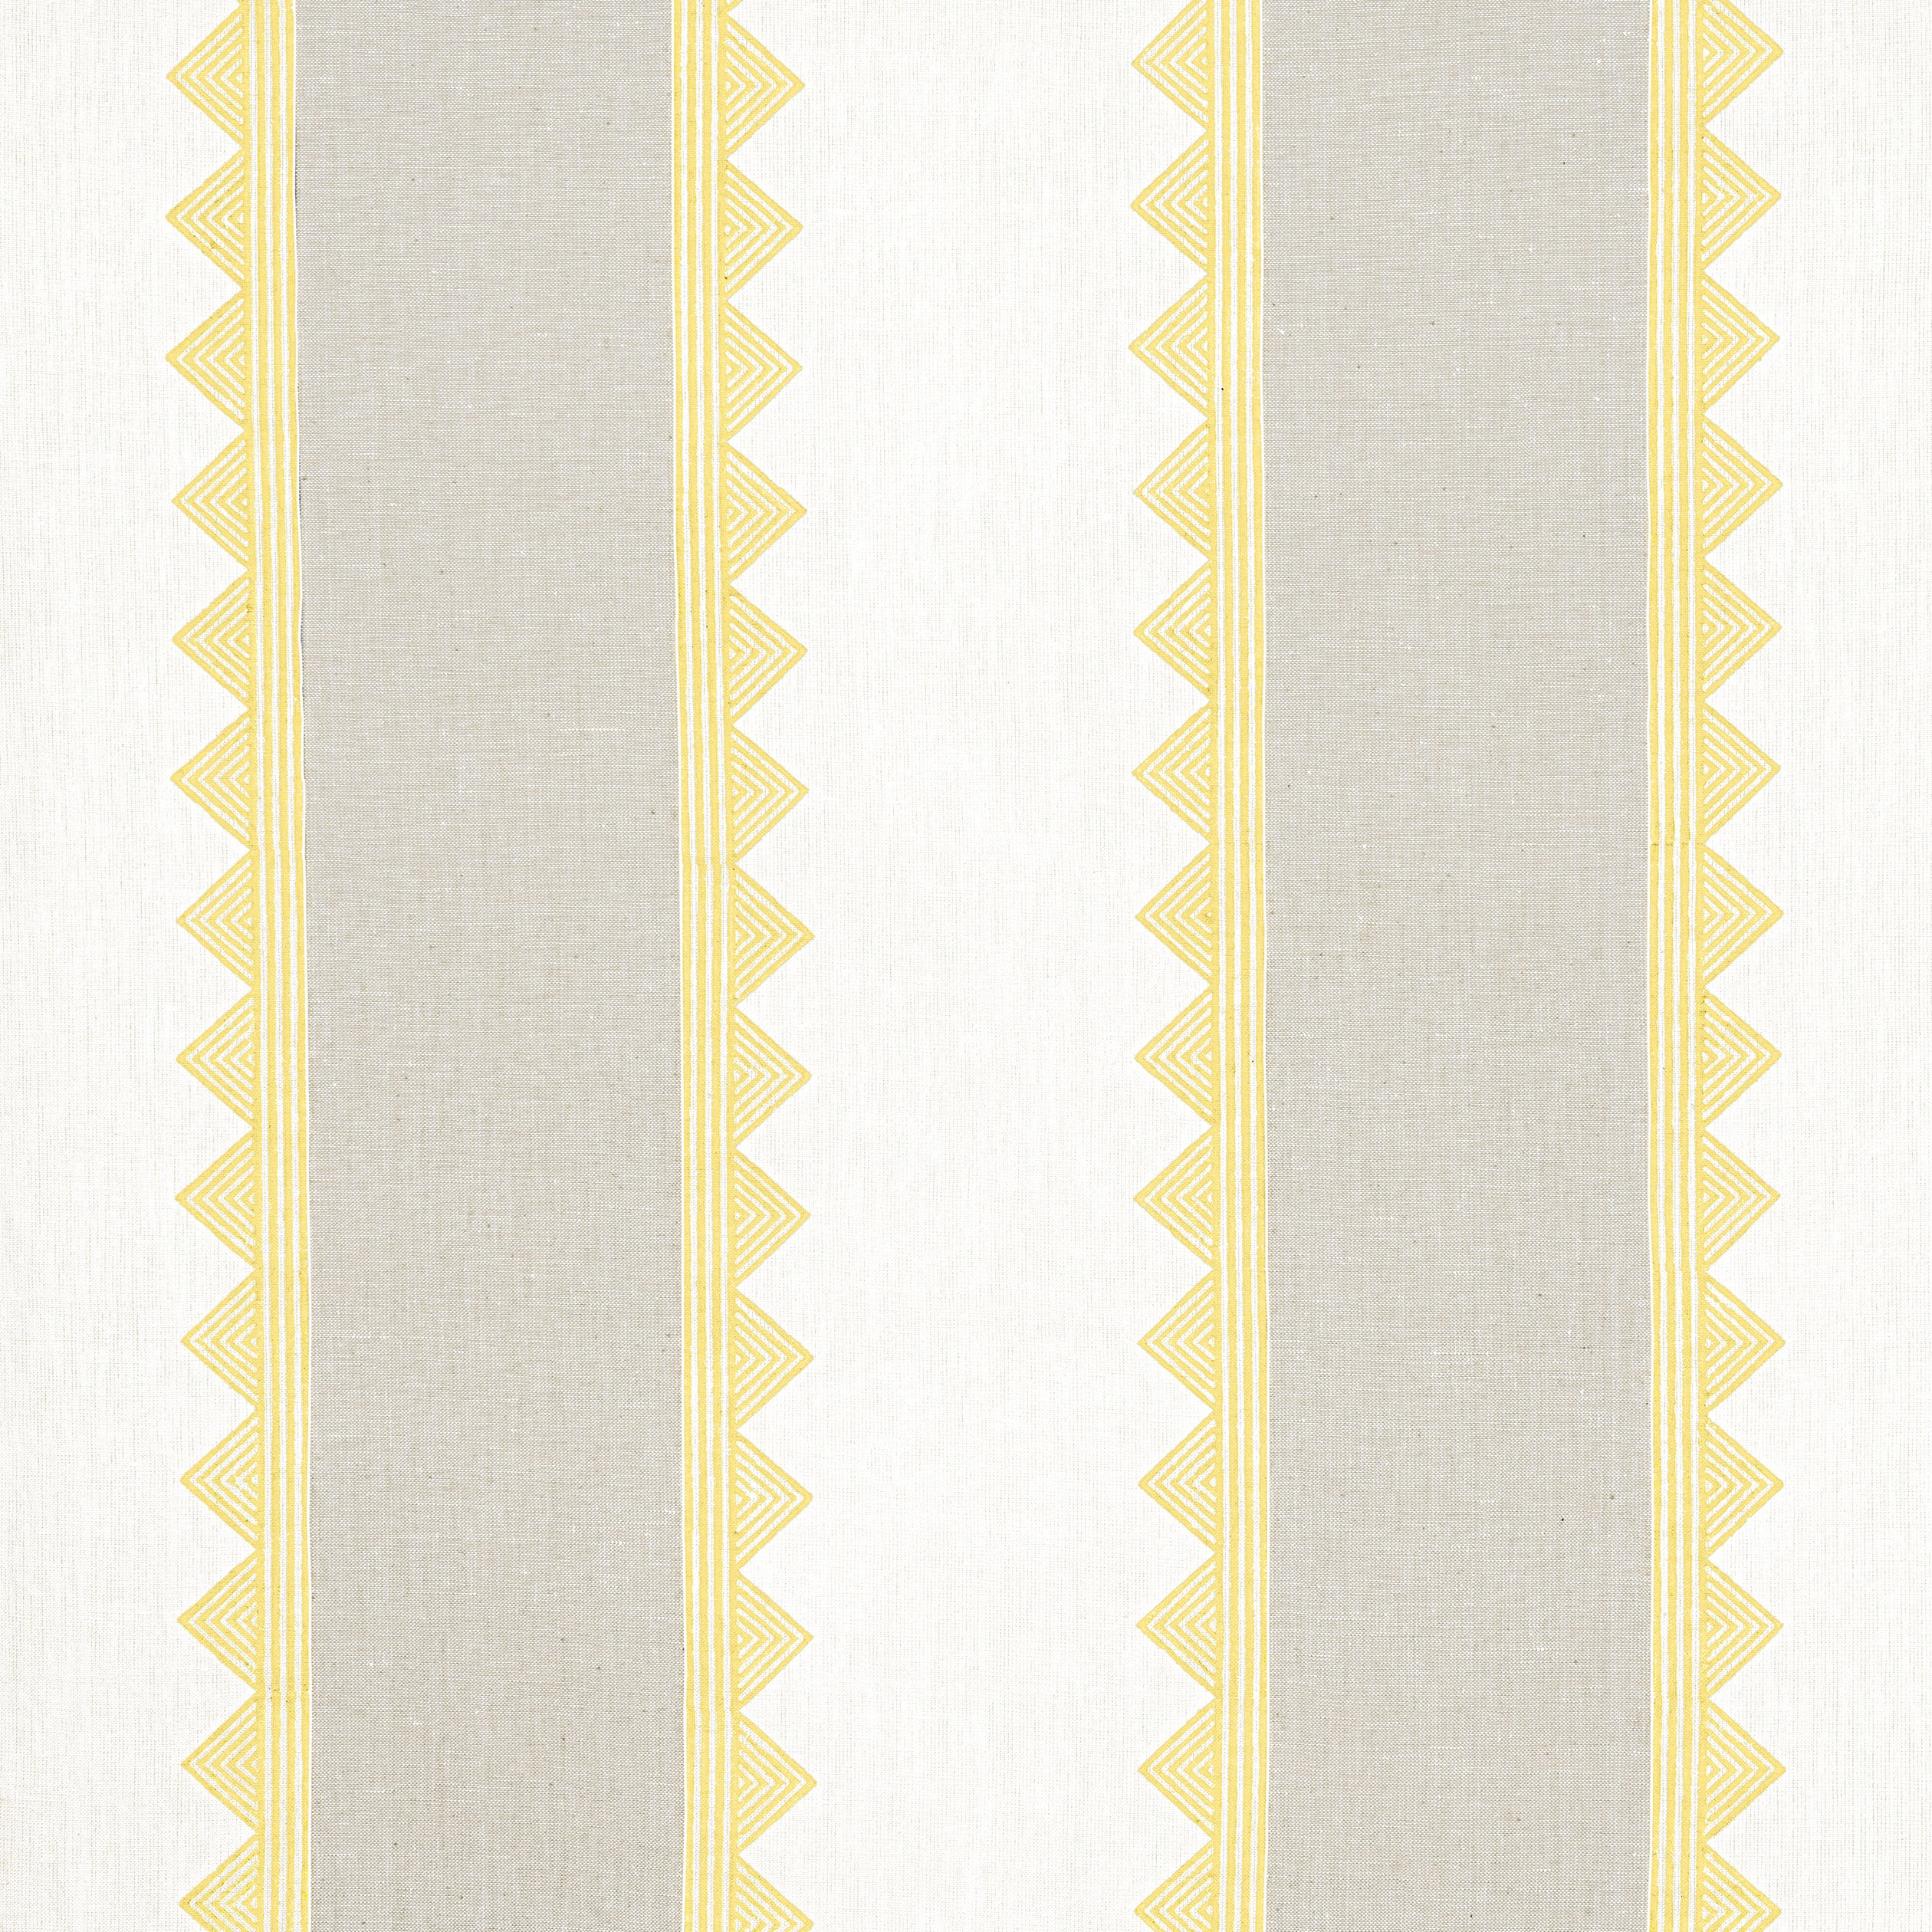 Kismet Stripe fabric in yellow color - pattern number F916230 - by Thibaut in the Kismet collection